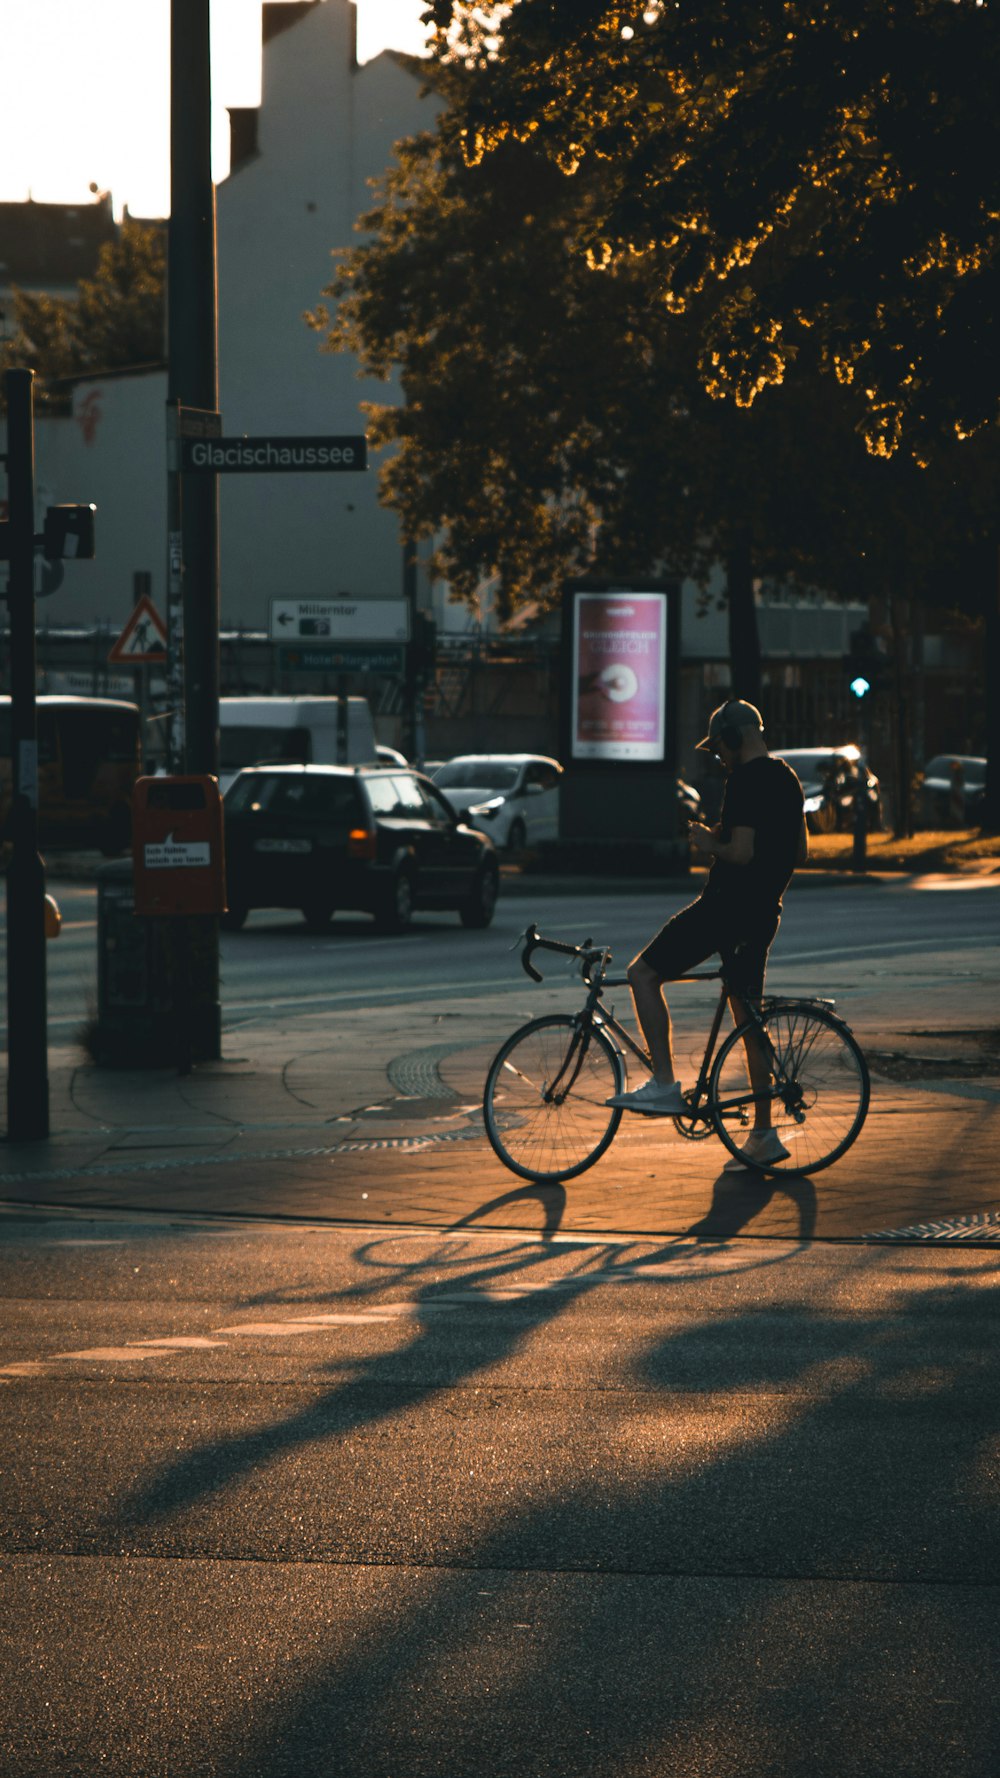 person riding on bicycle during daytime